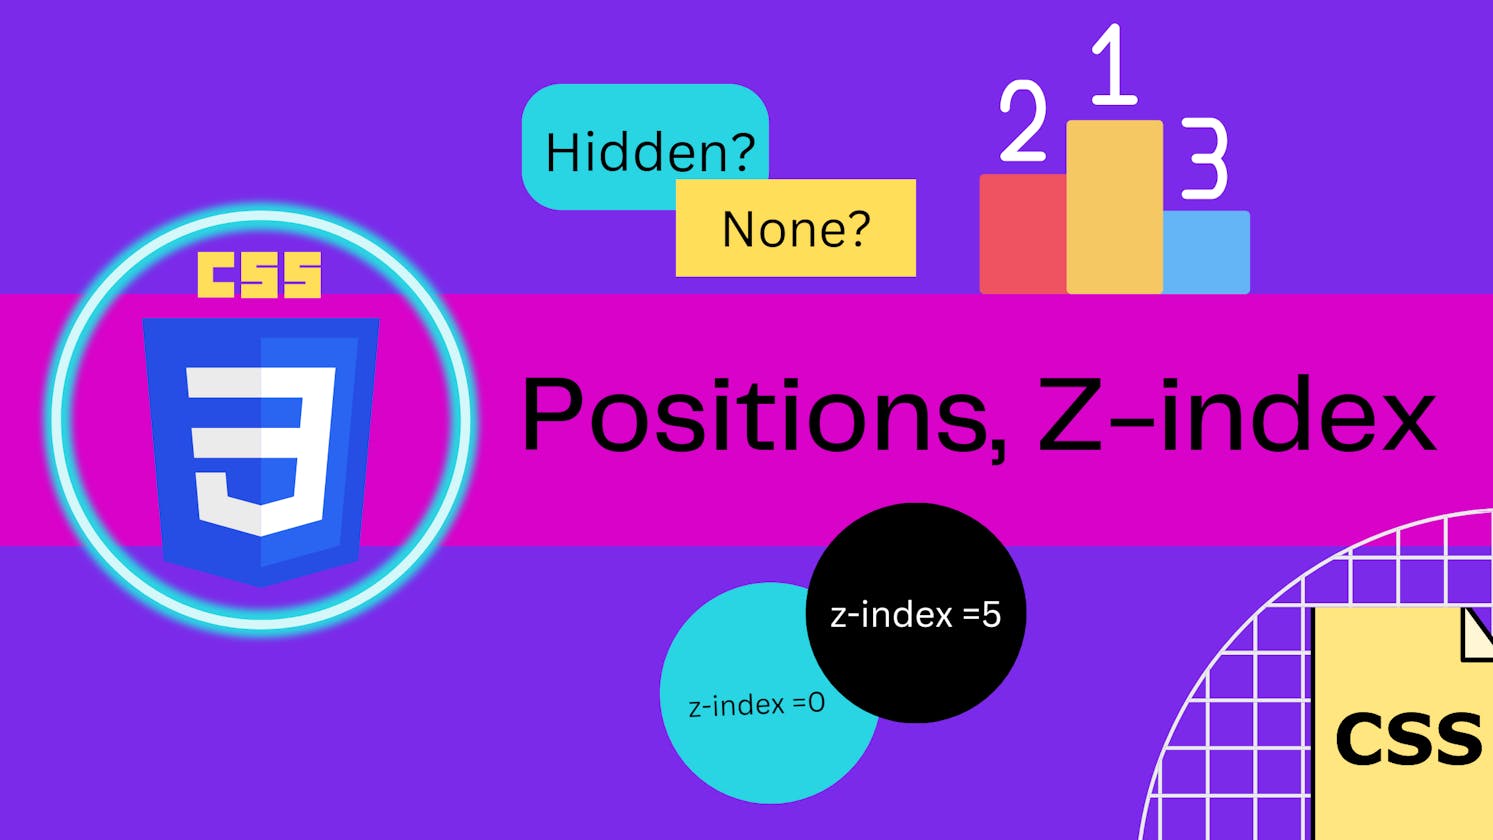 Positions, Visibility, Z-index: